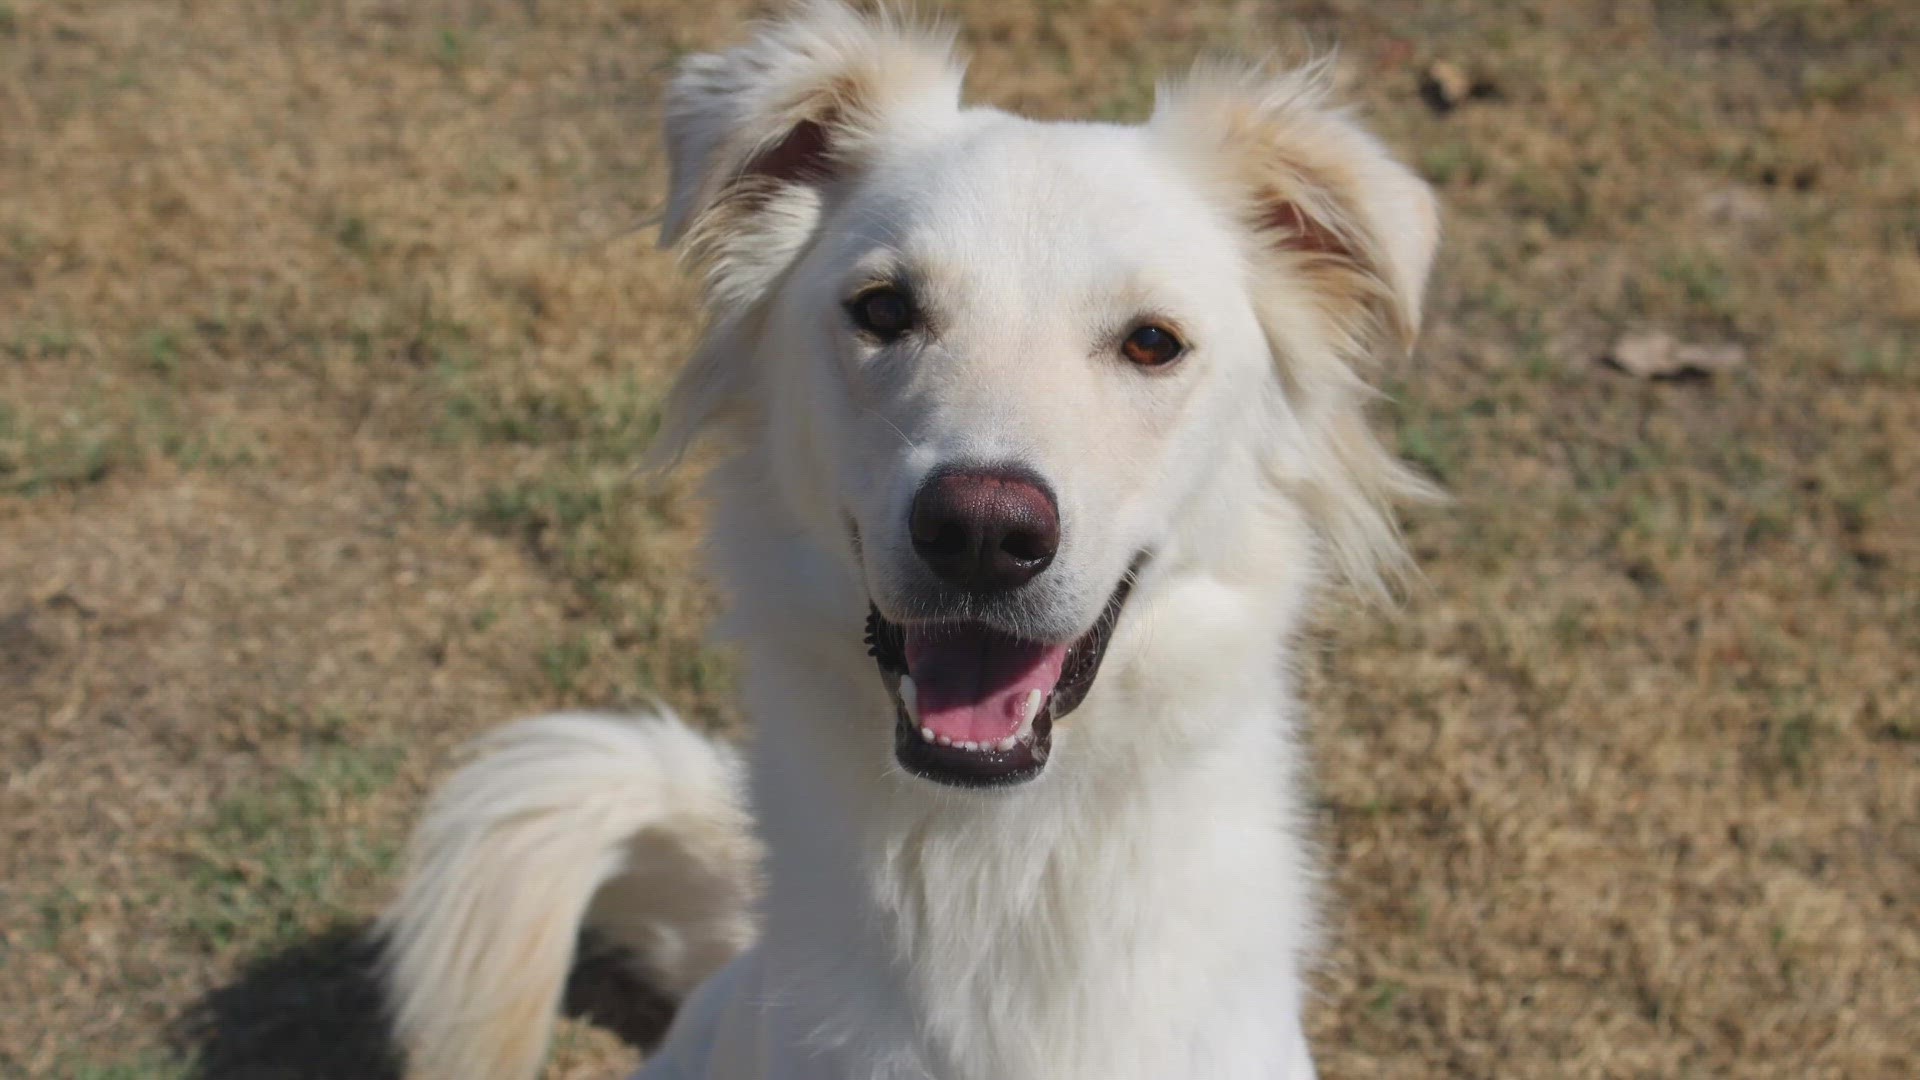 Johnny is a two-year-old male Great Pyrenees mix.